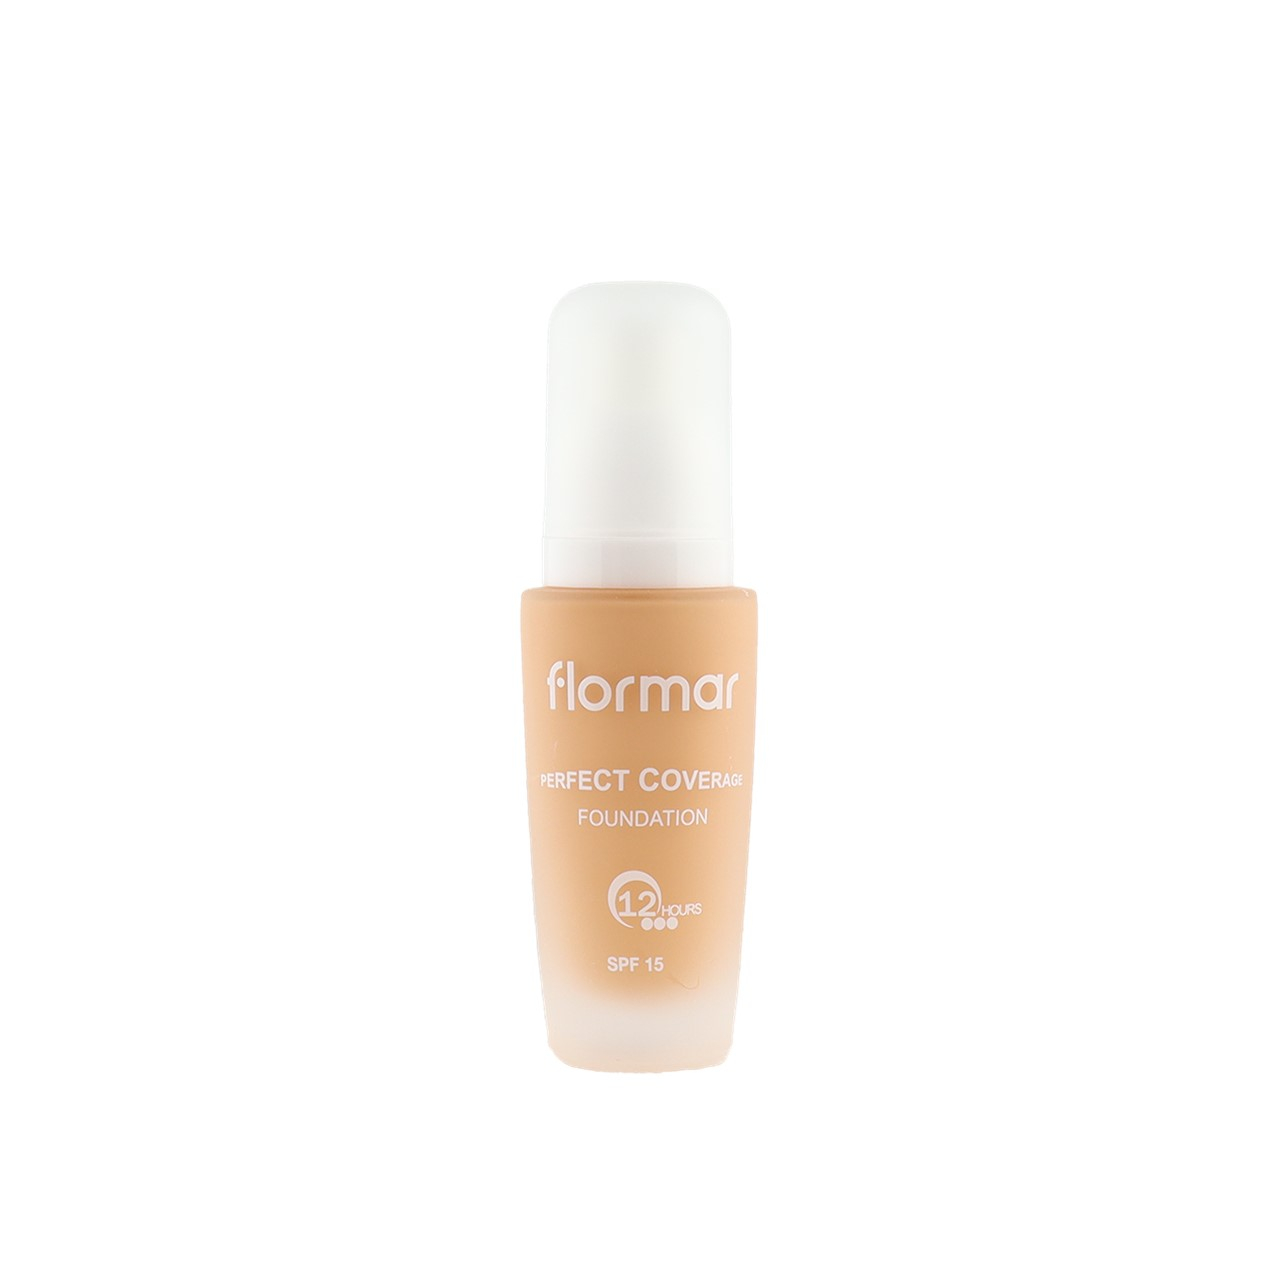 Flormar - If you are looking for a lightweight, effective, and